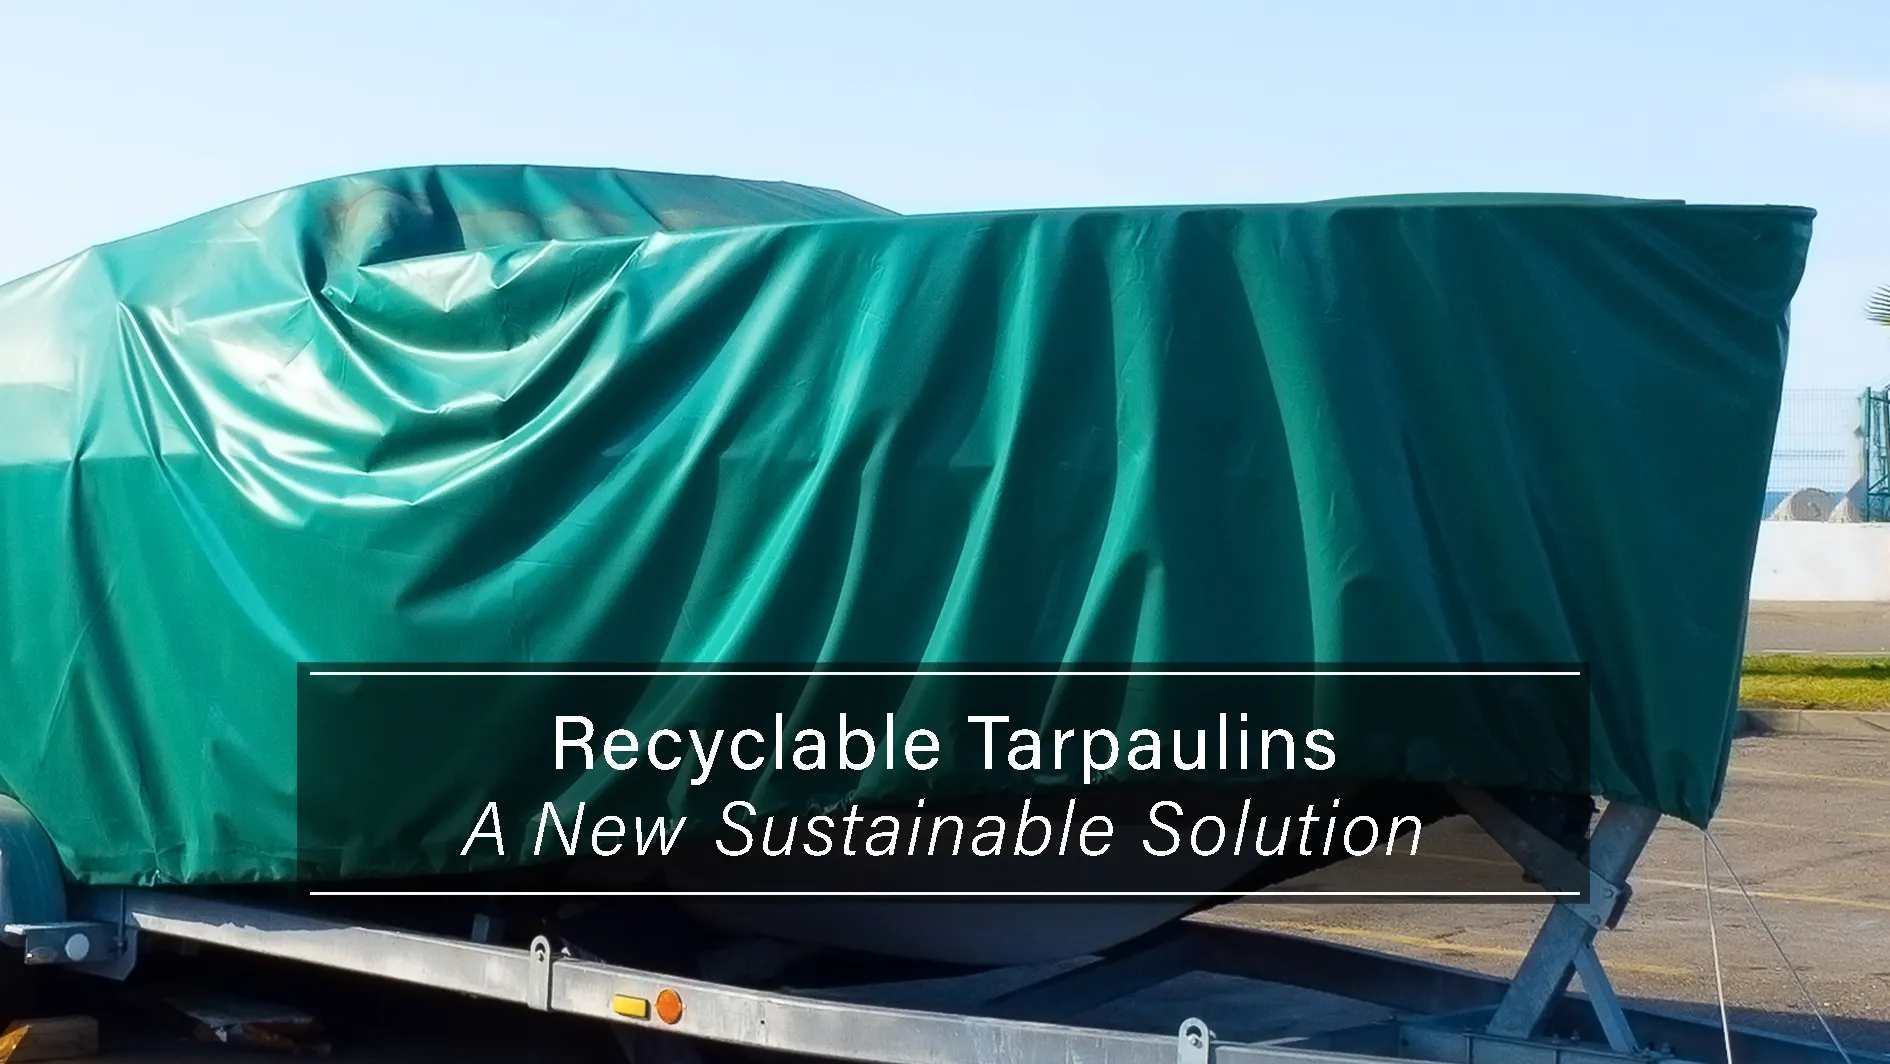 Recyclable Tarpaulins – A New Sustainable Solution